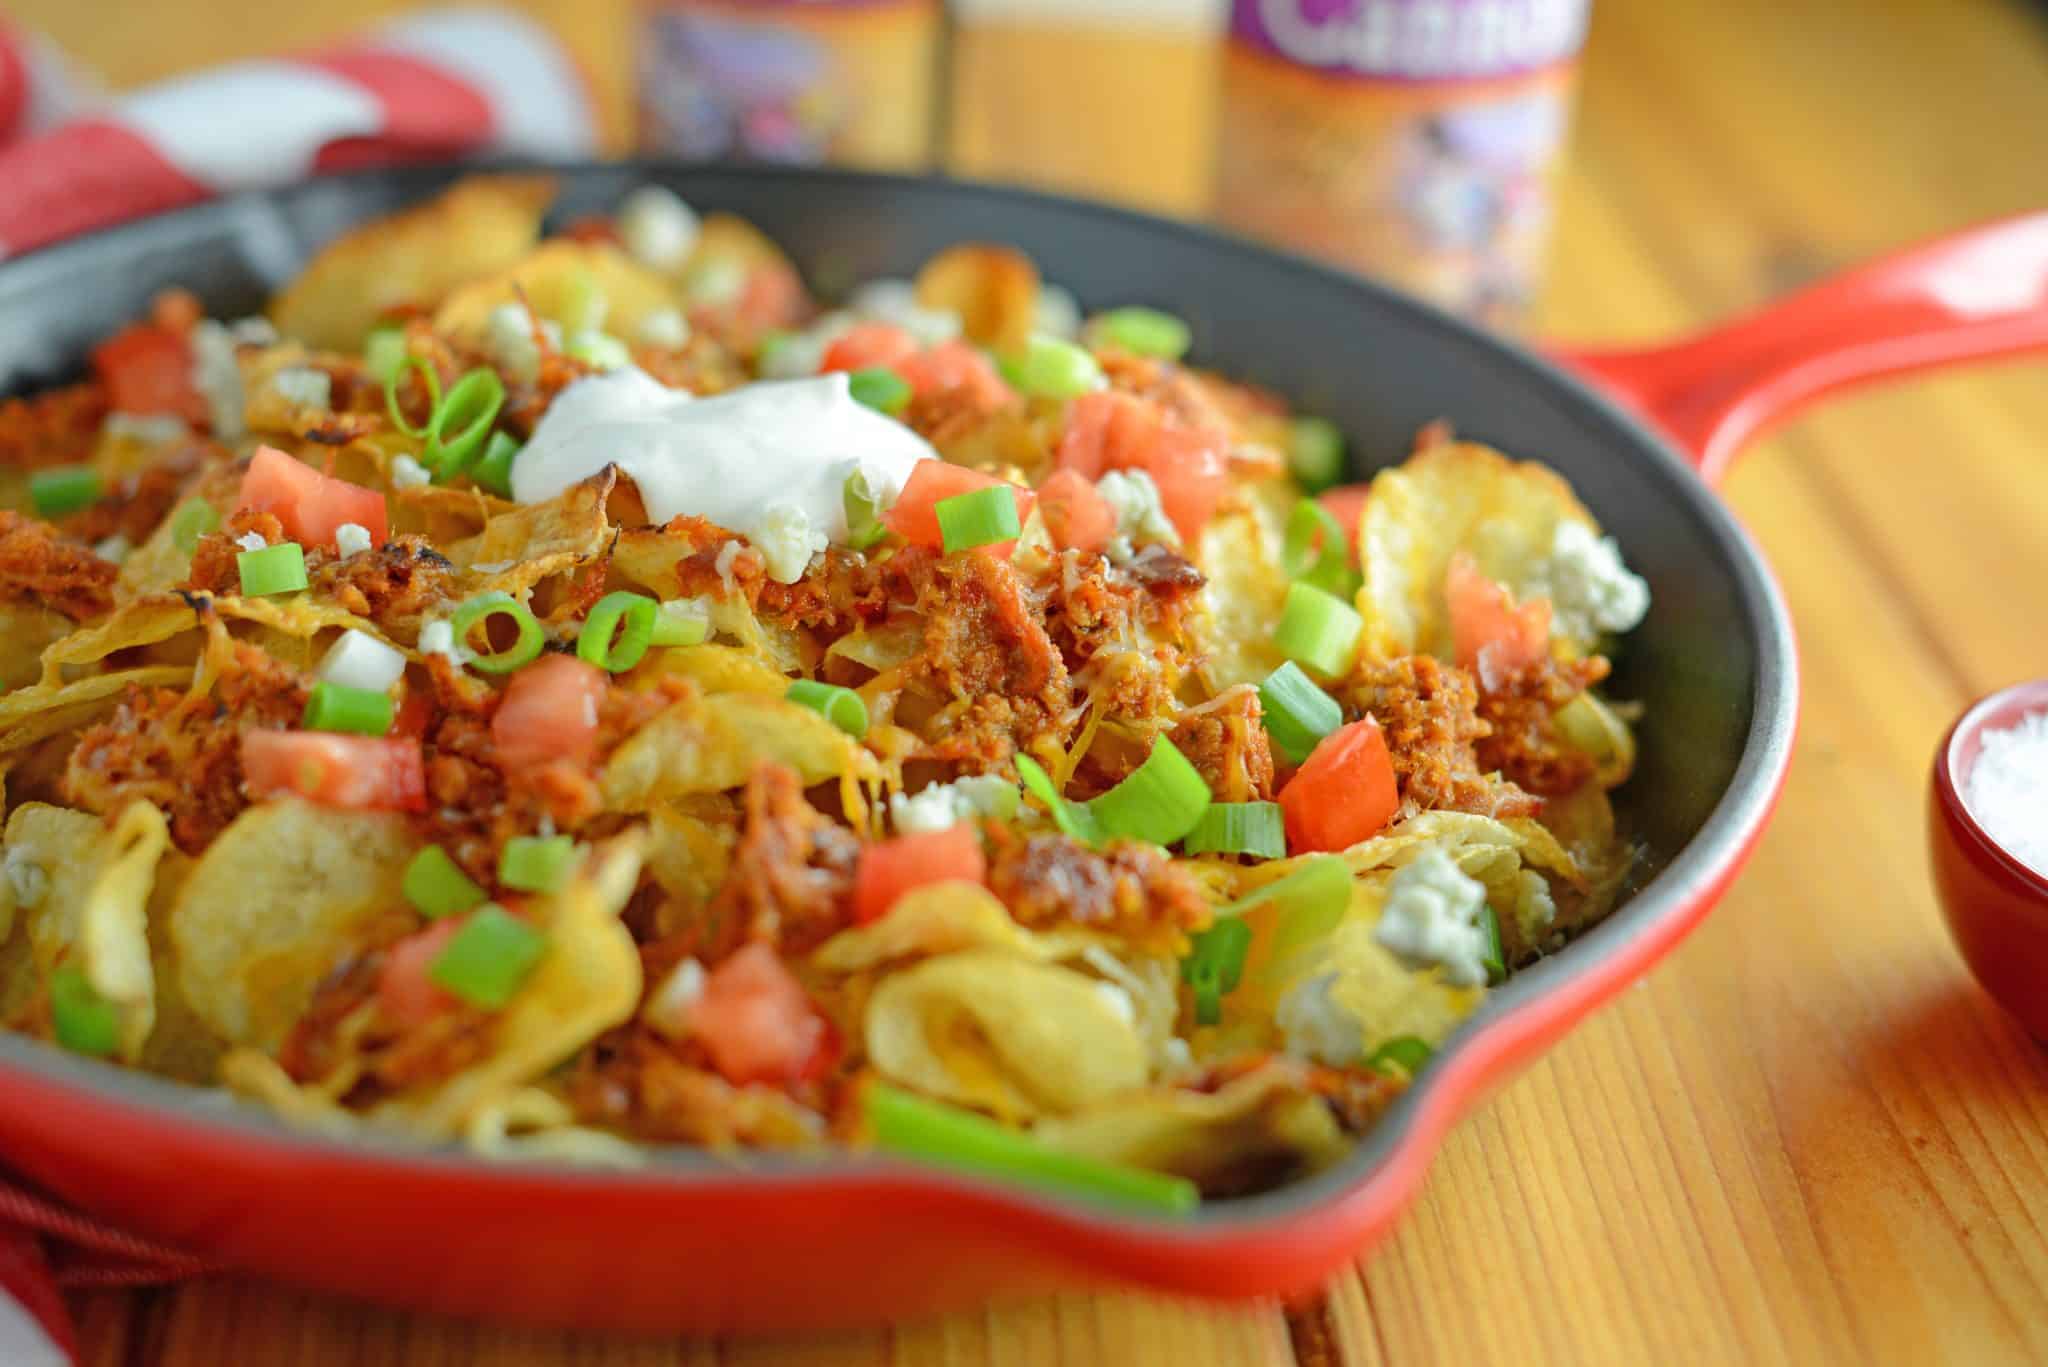 Pulled Pork Potato Chip Nachos are an easy appetizer or meal that your whole family will love made with kettle cooked potato chips and zesty pulled pork! 